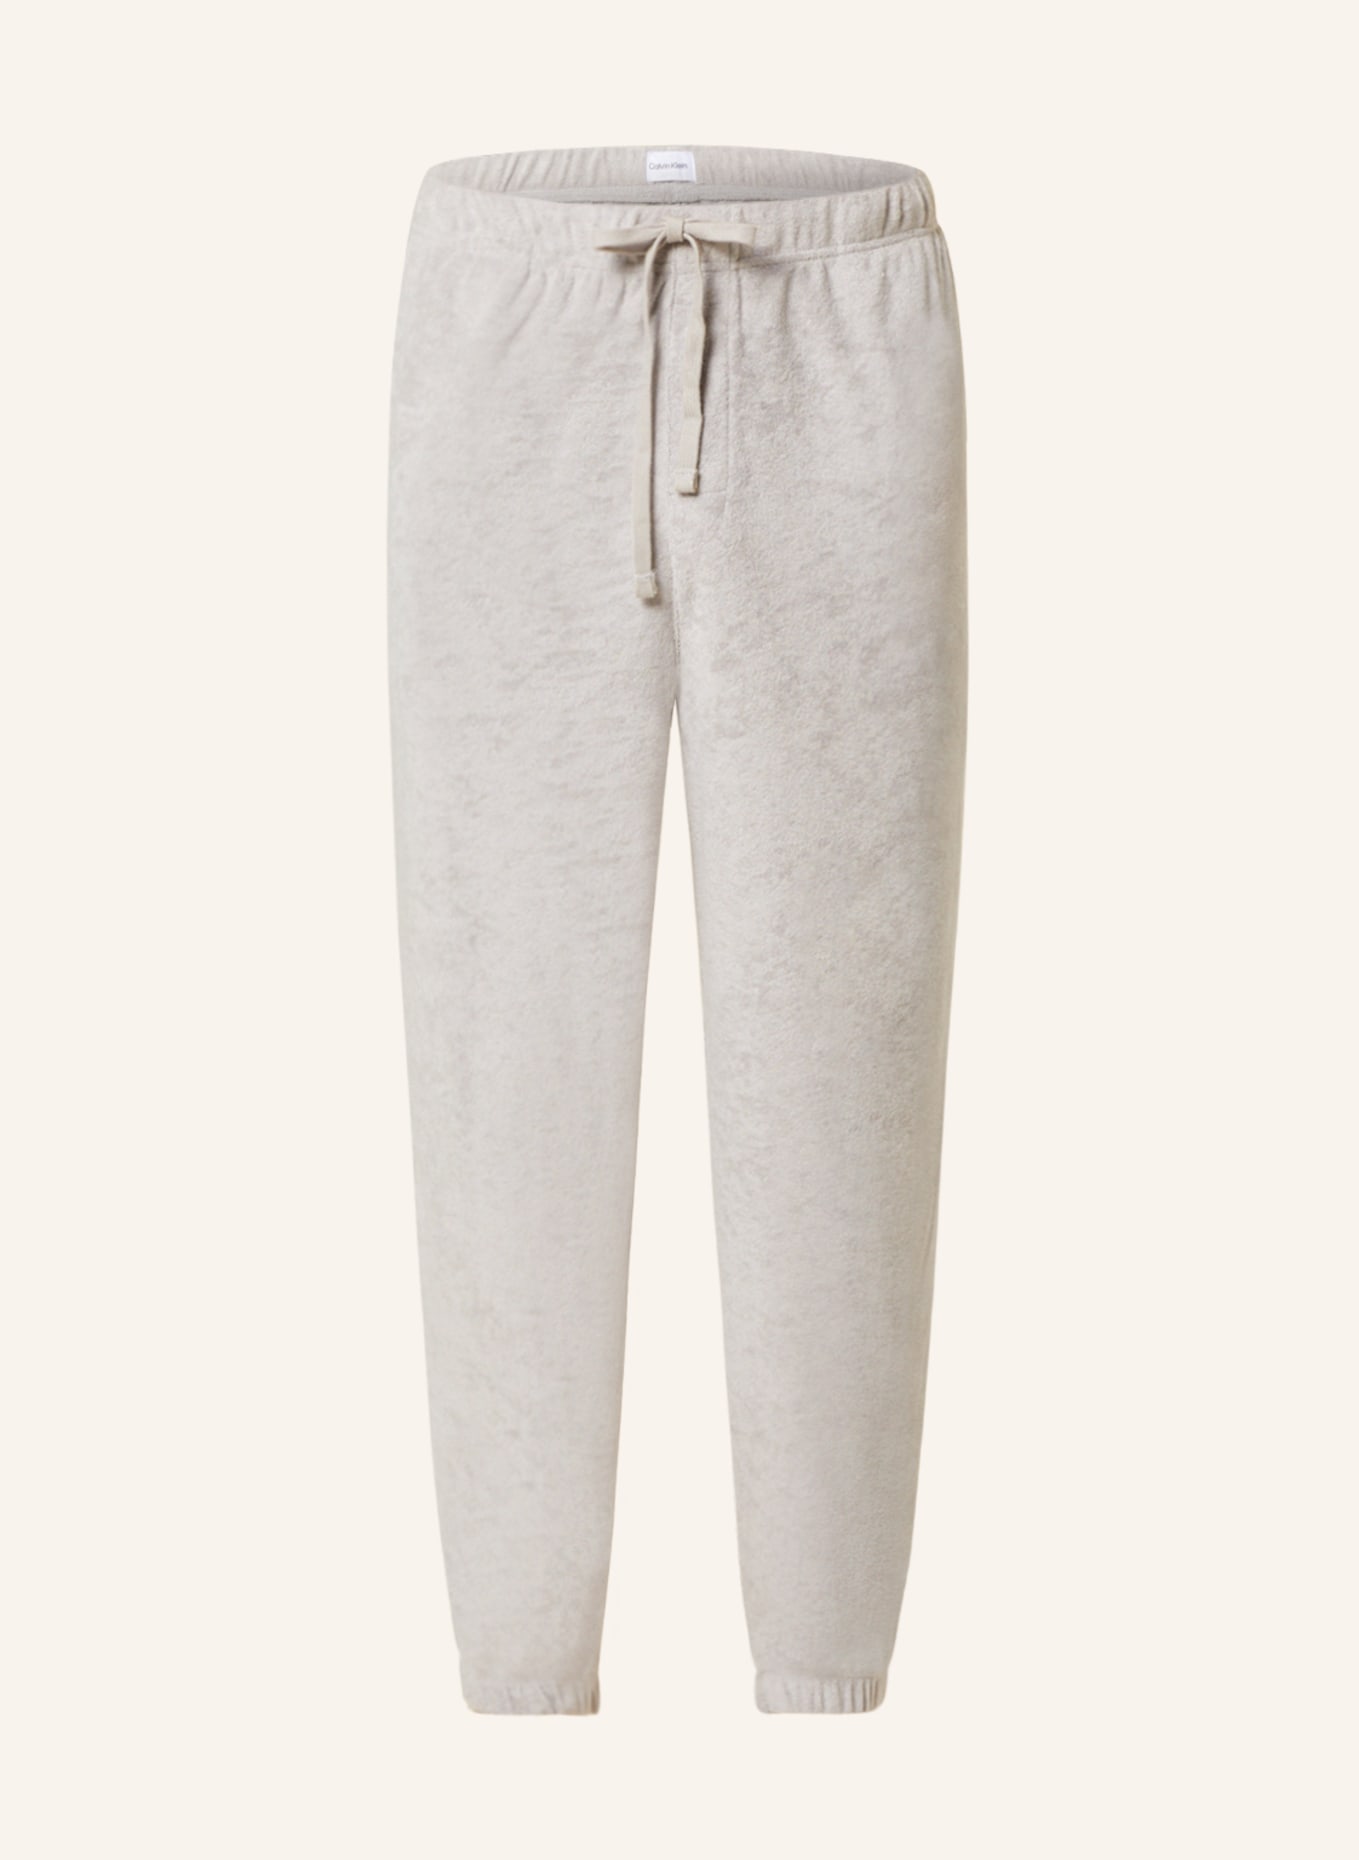 Calvin Klein Lounge pants made of terry cloth, Color: LIGHT GRAY (Image 1)